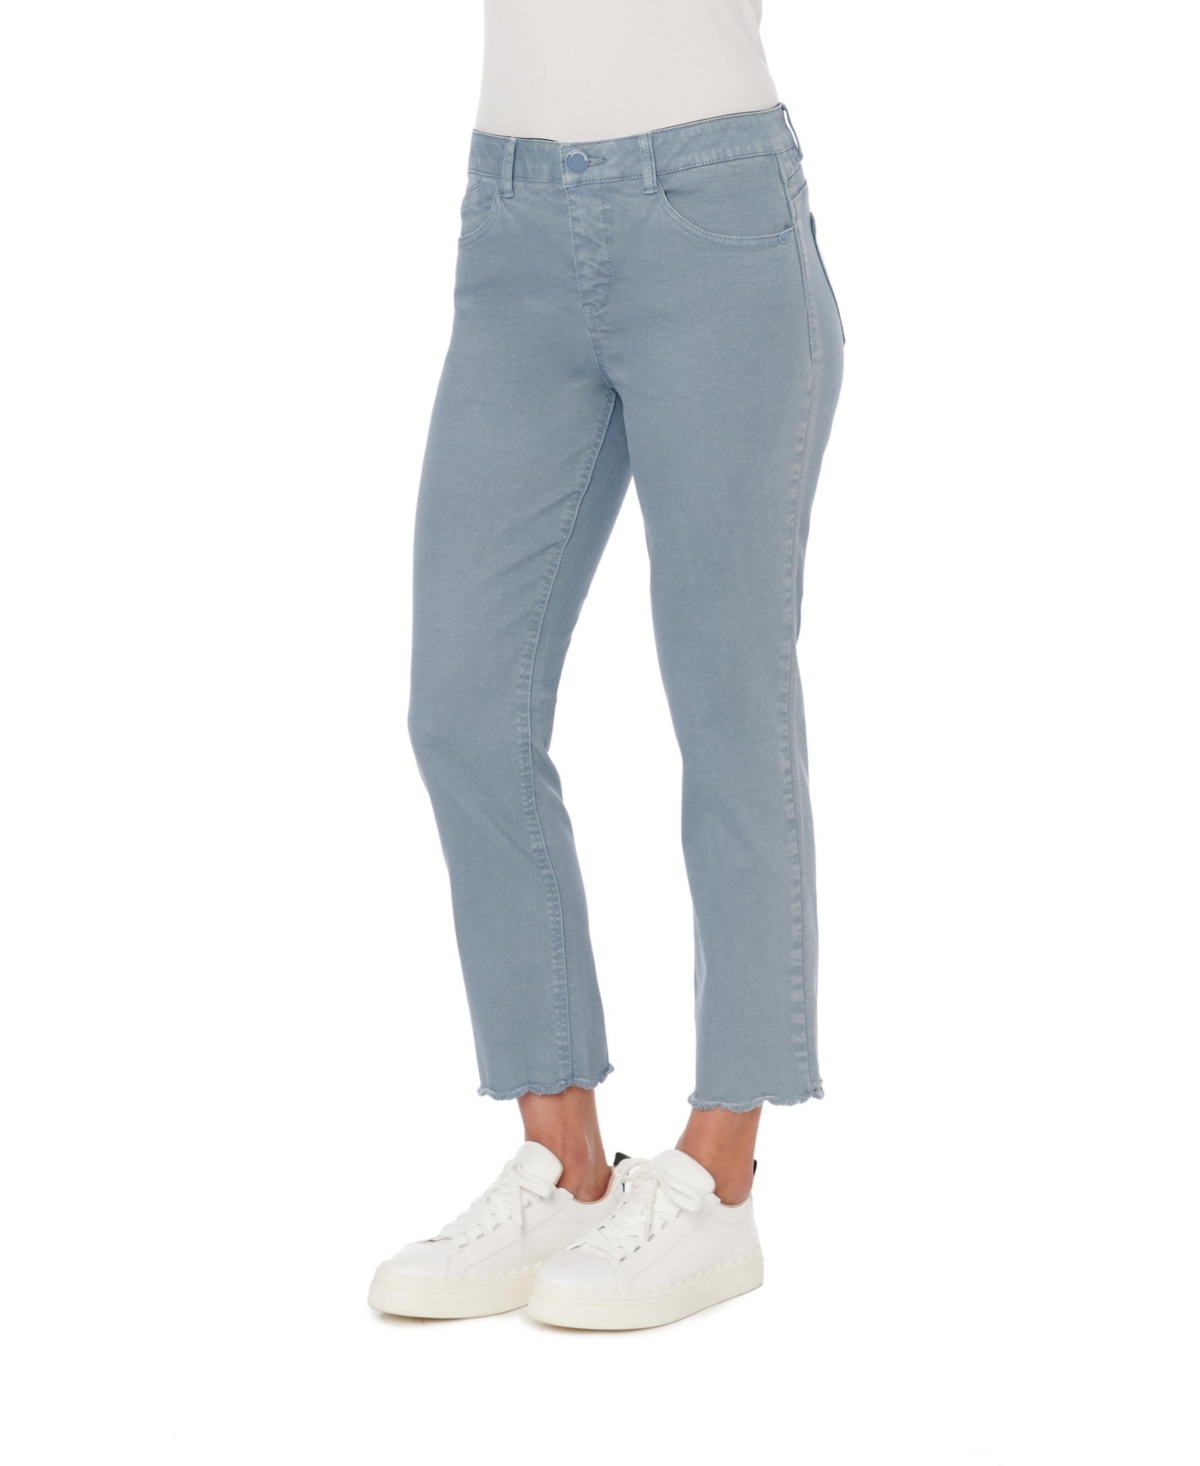  Women's Ab Solution High Rise Slim Straight Crop Jeans with Scallop Fray